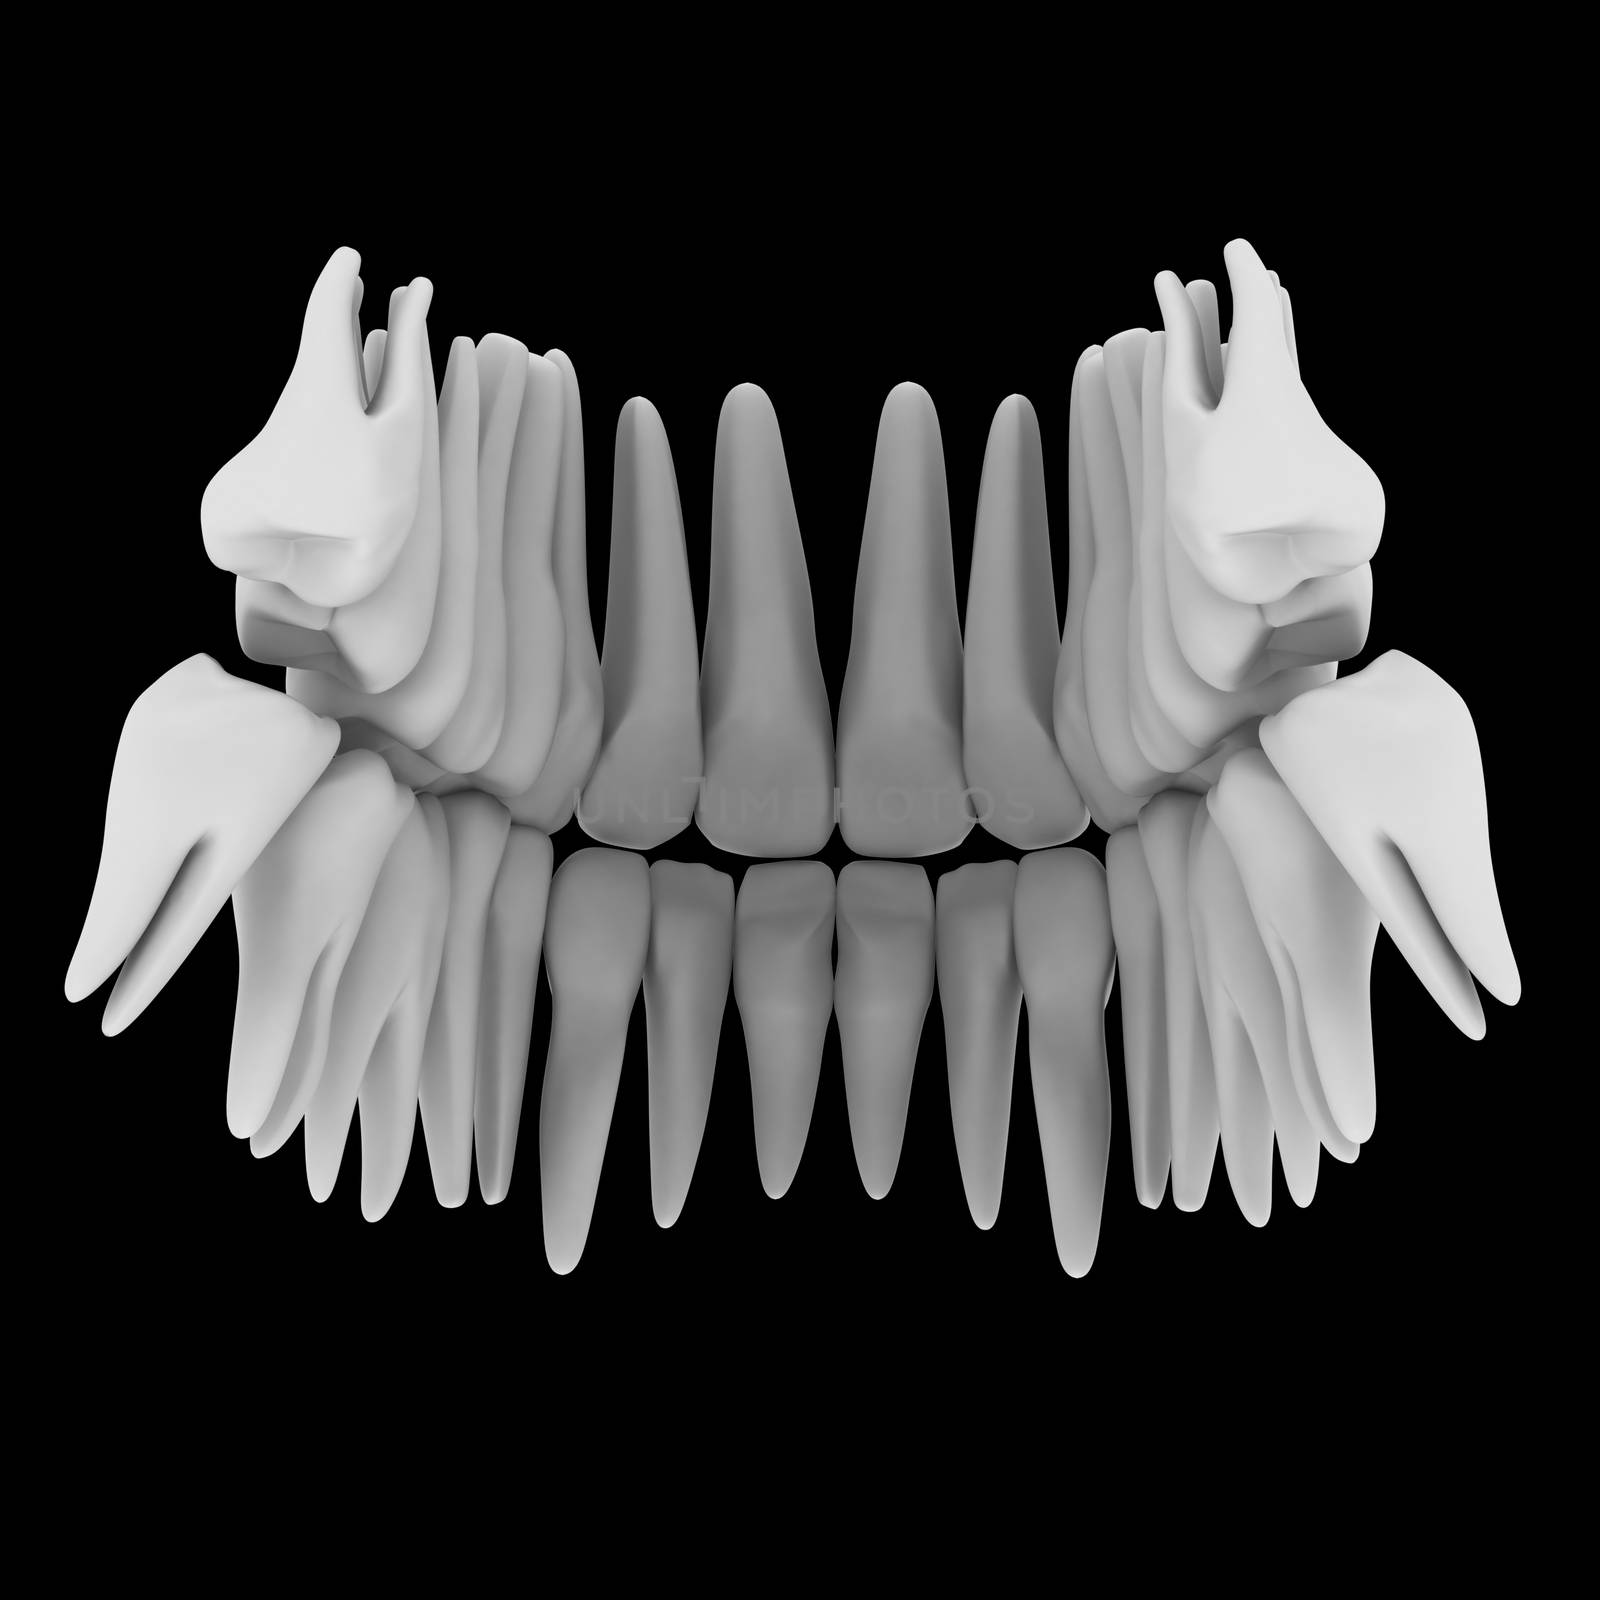 3d image of white teeth isolated on black by maya2008